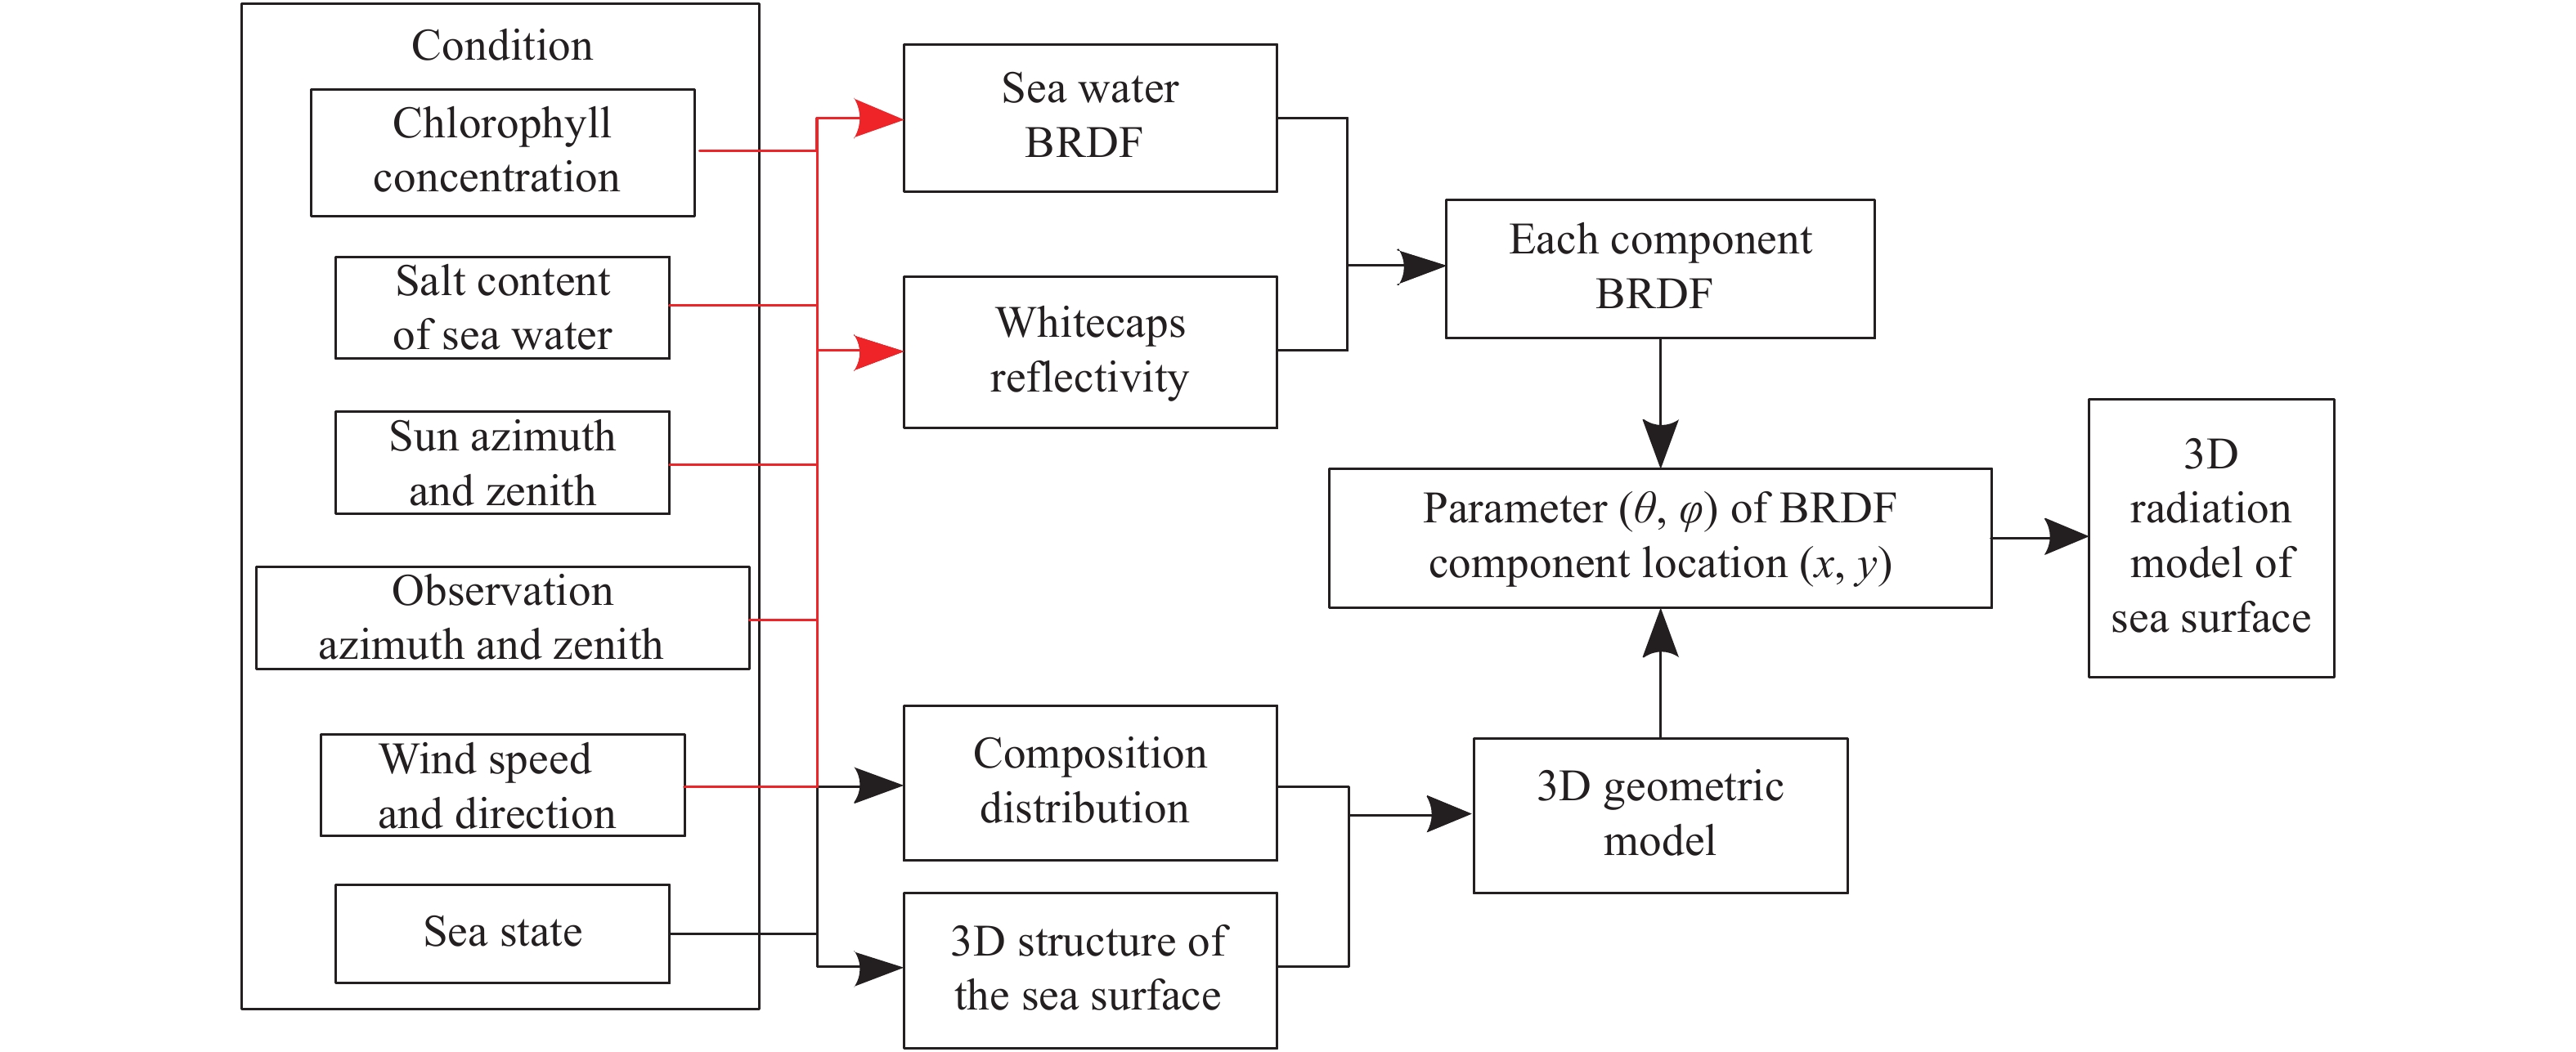 3D radiation model structure diagram of the sea surface